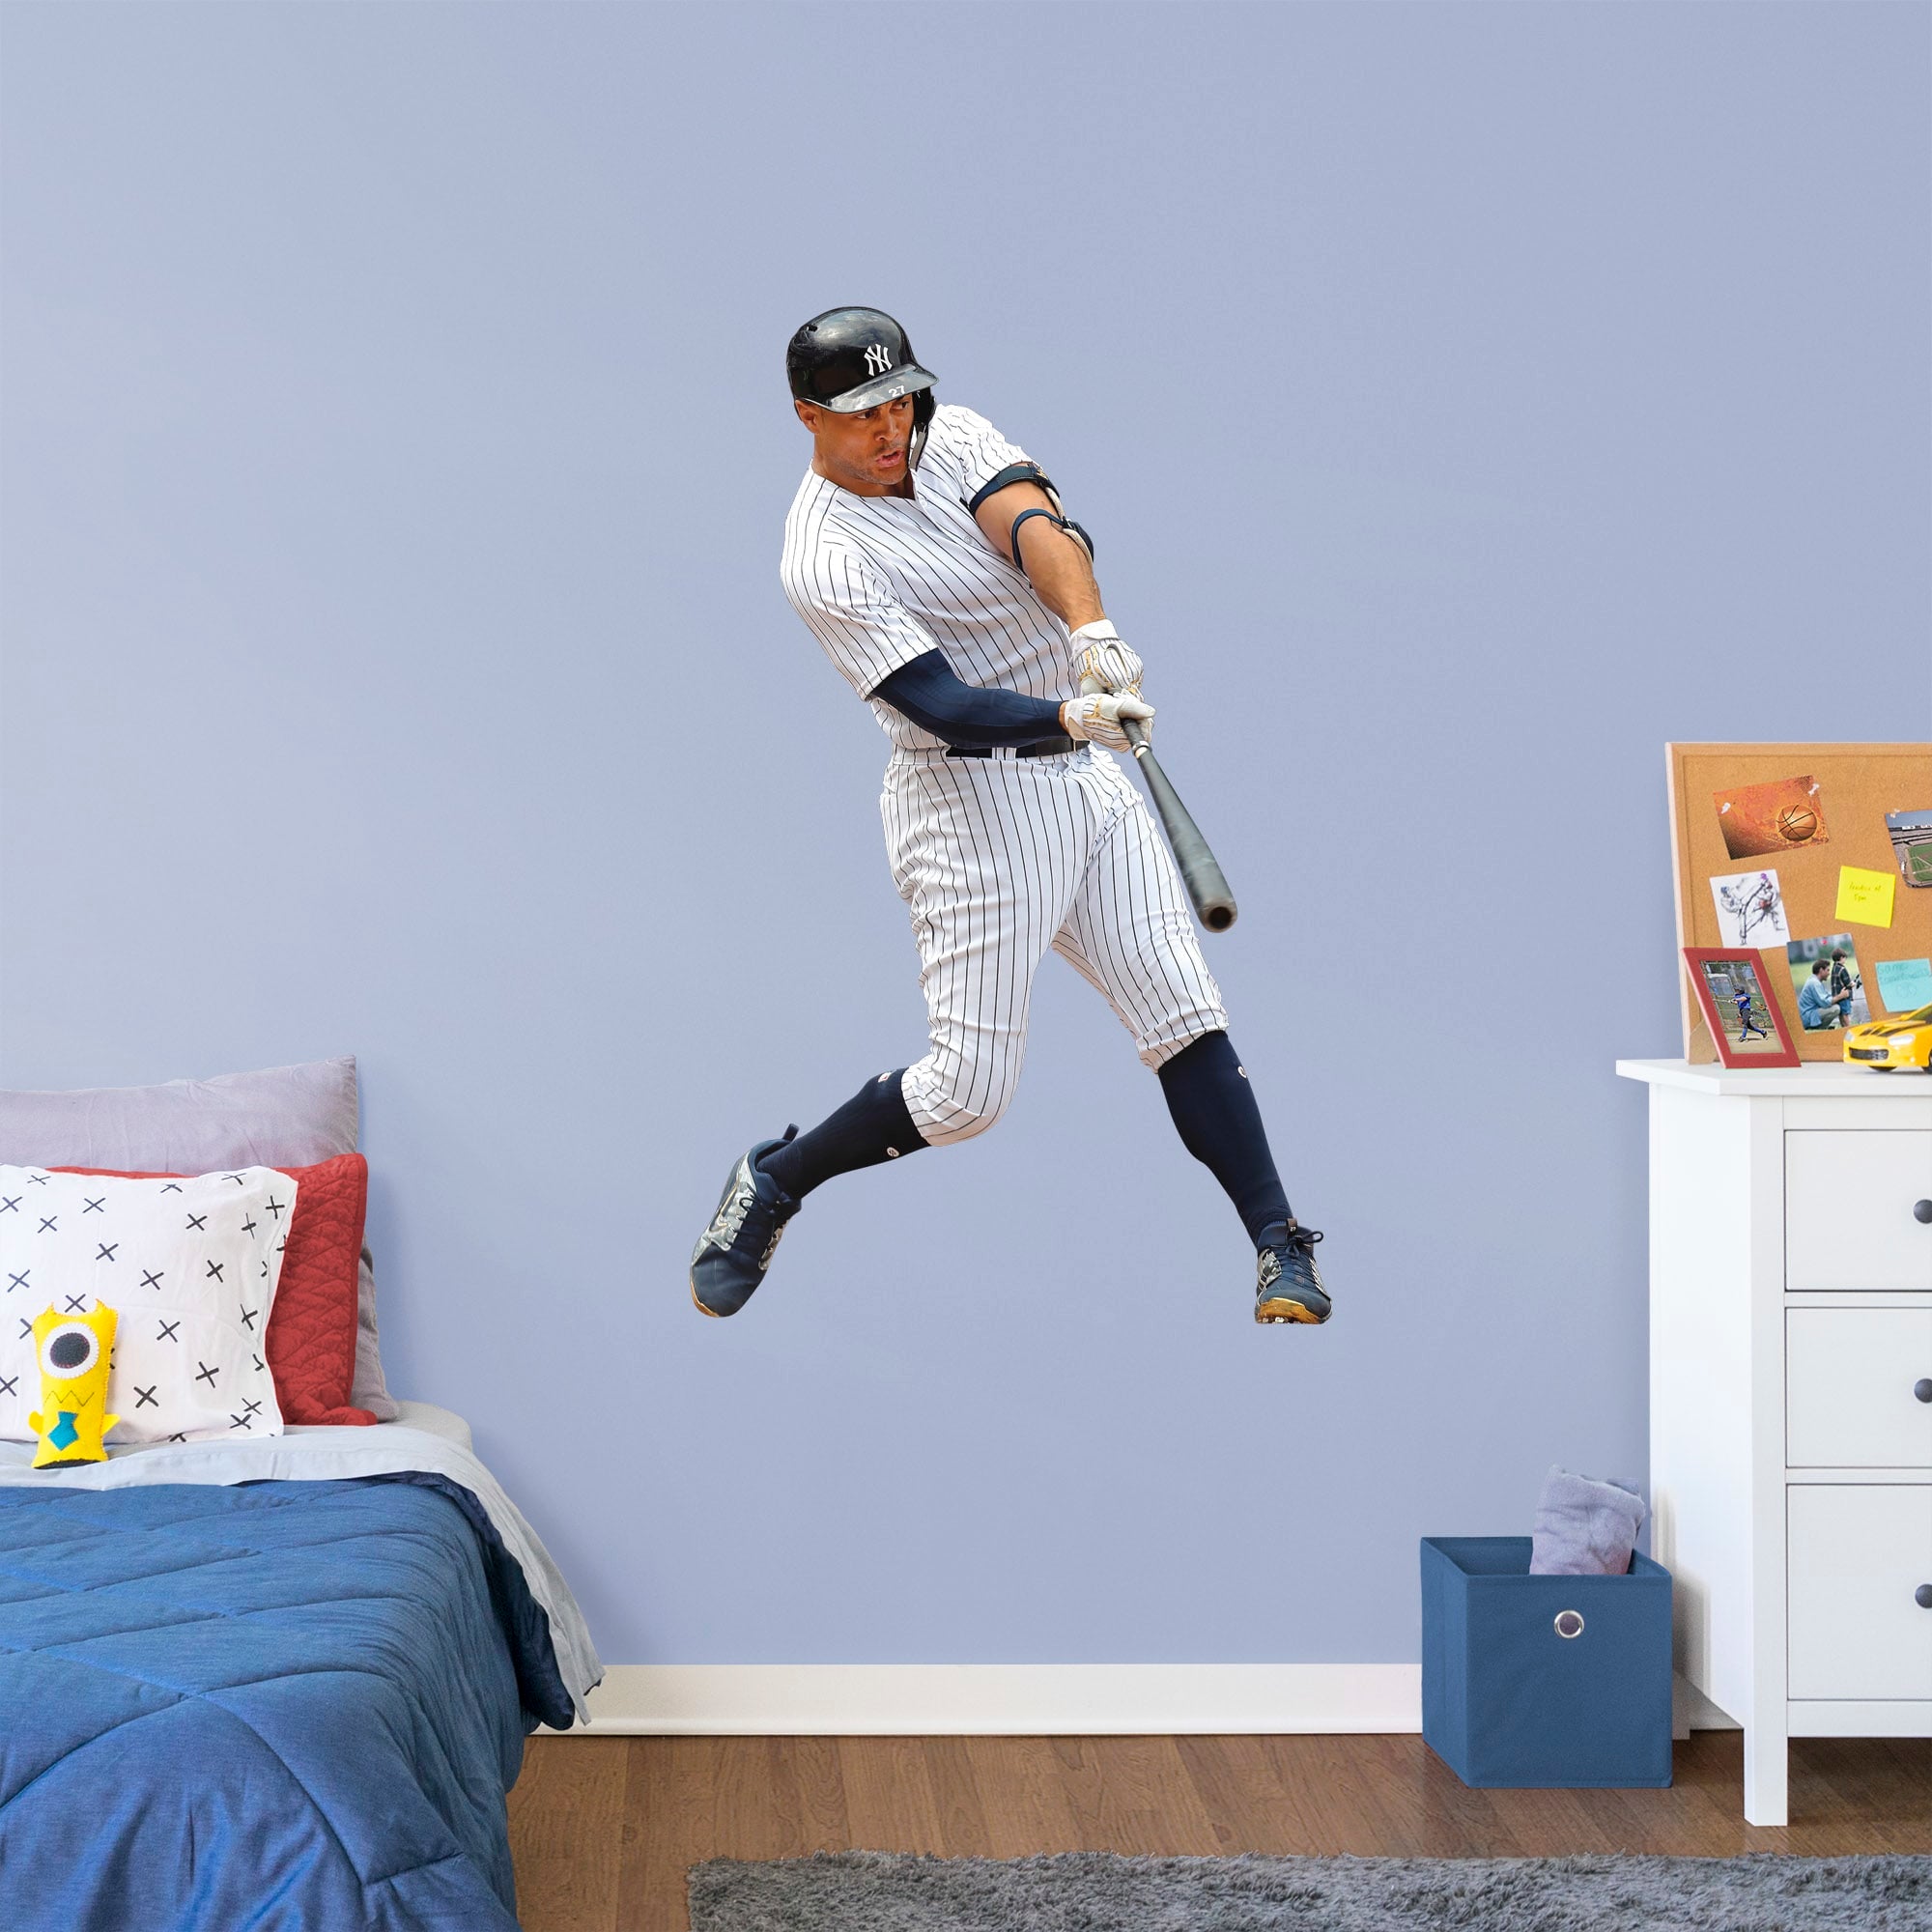 Giancarlo Stanton for New York Yankees: Swing - Officially Licensed MLB Removable Wall Decal Giant Athlete + 2 Decals (32"W x 51